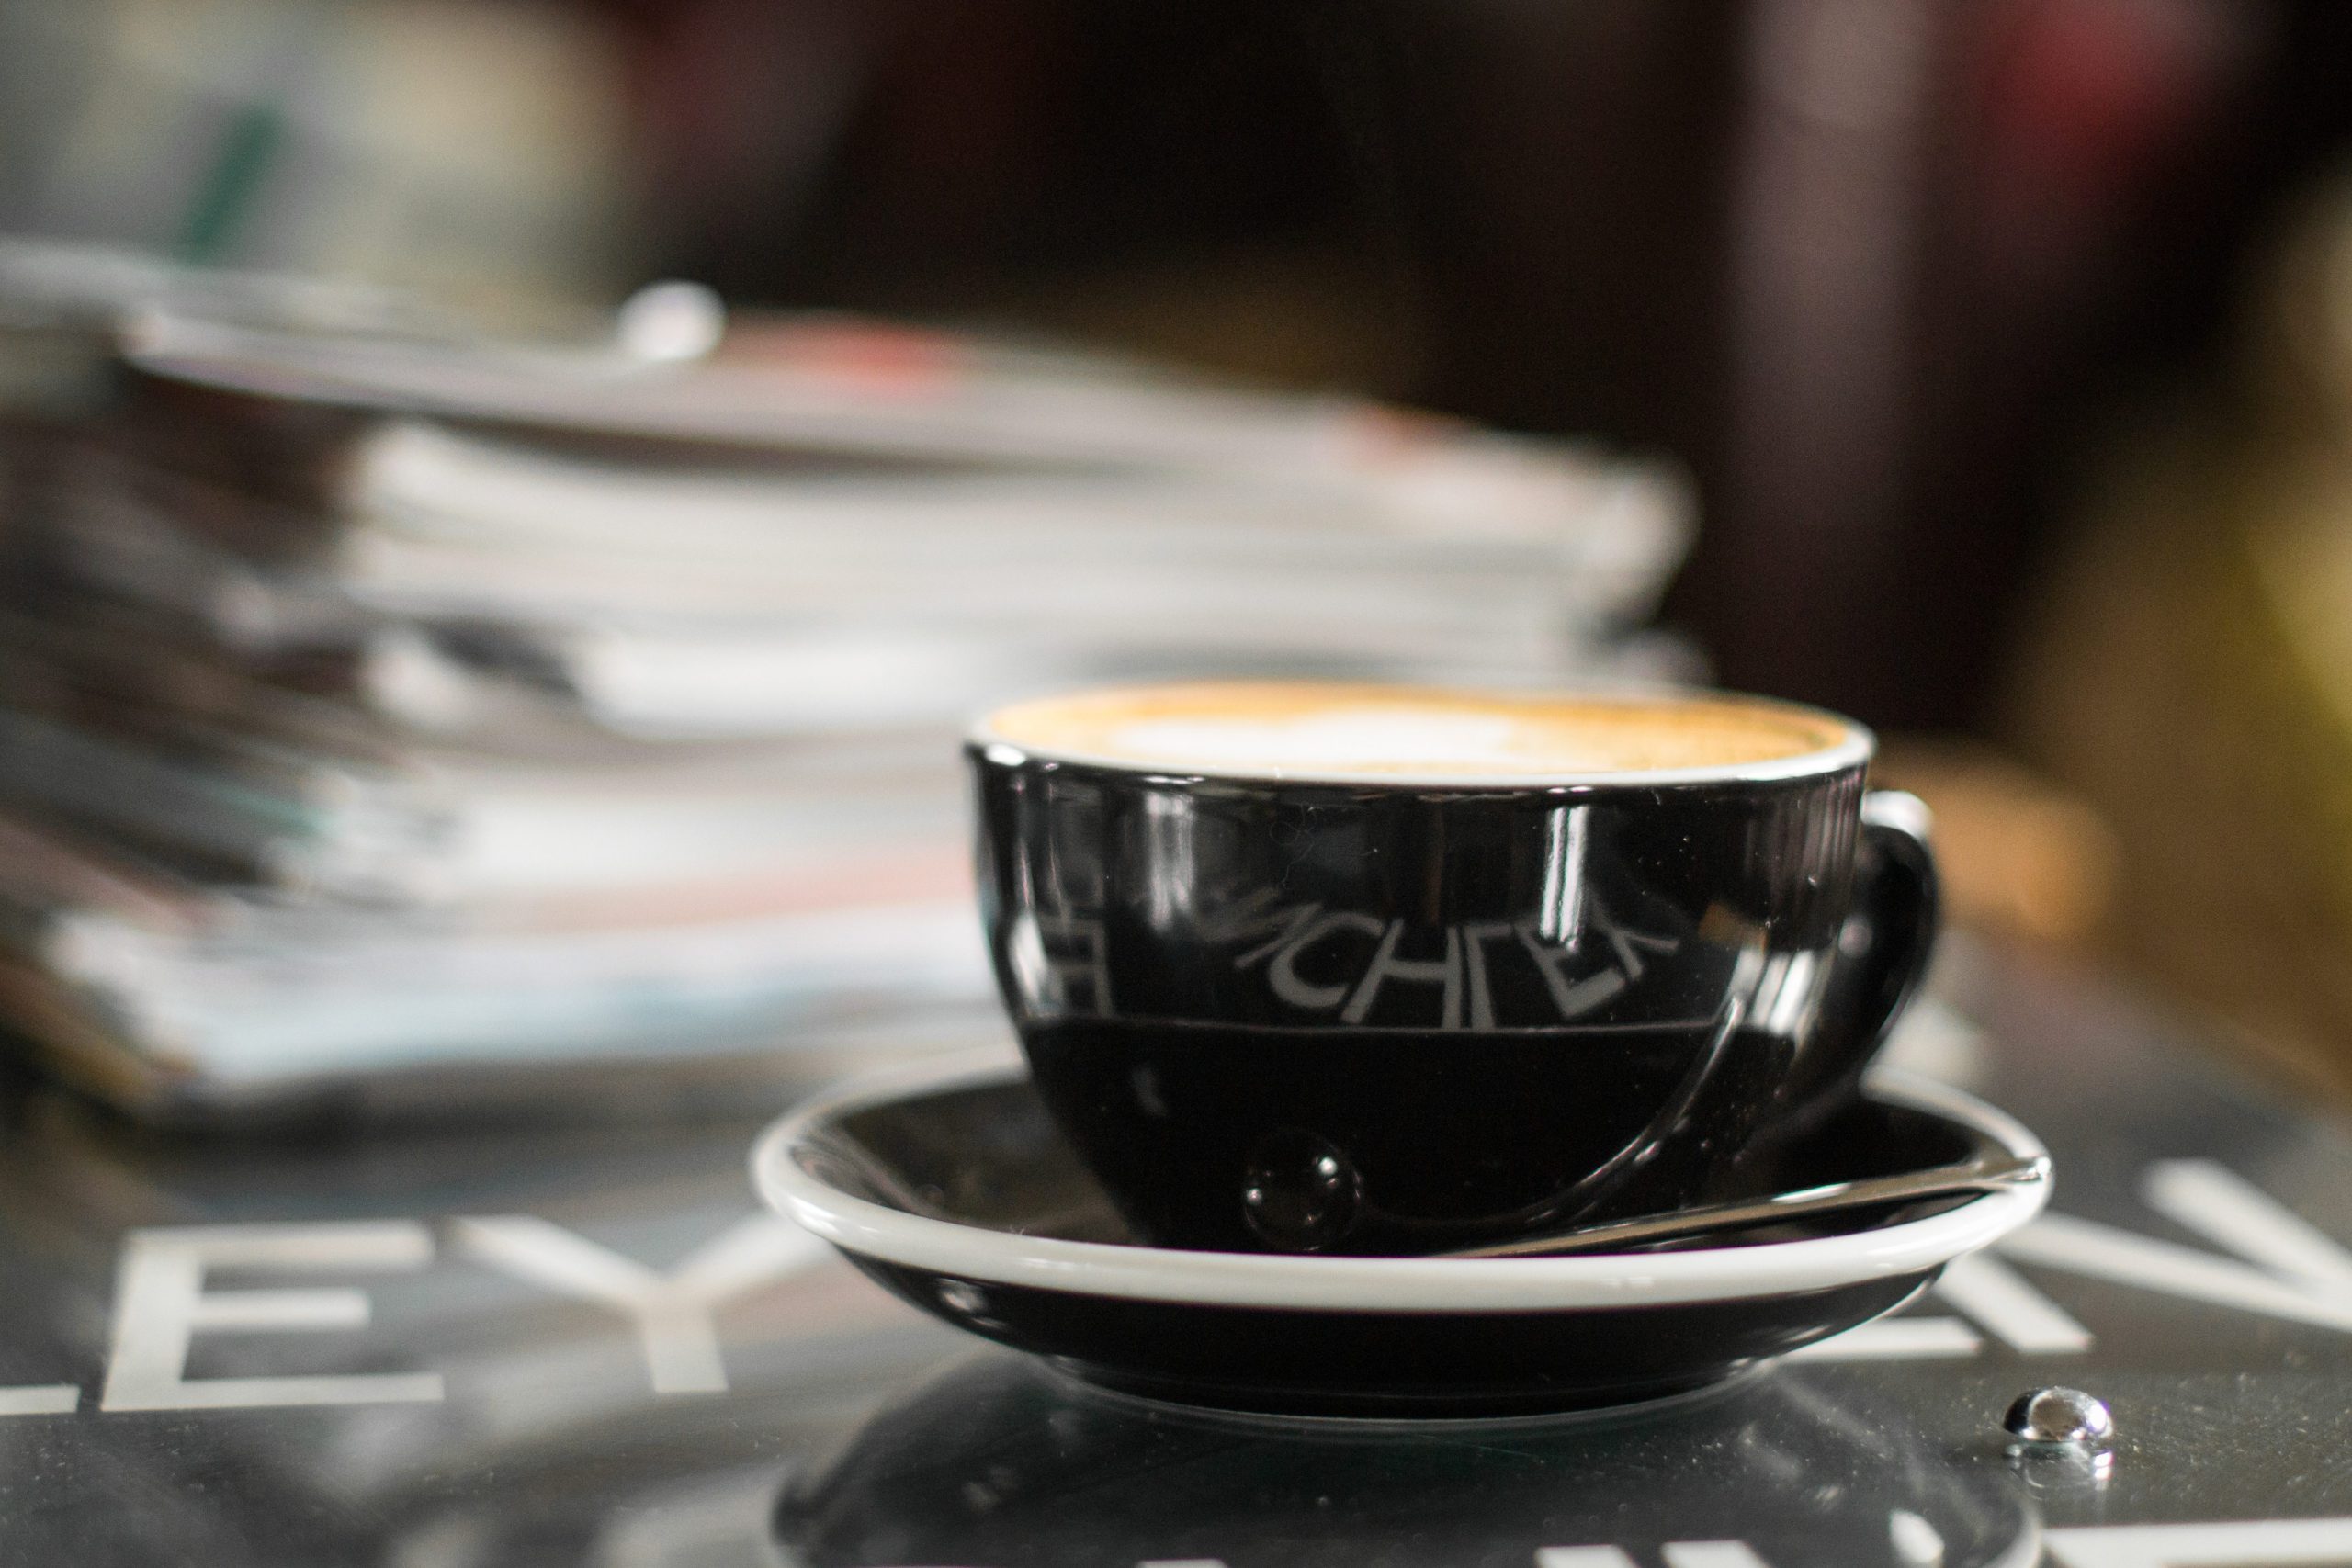 Latte in a black cup and saucer beside stack of magazines